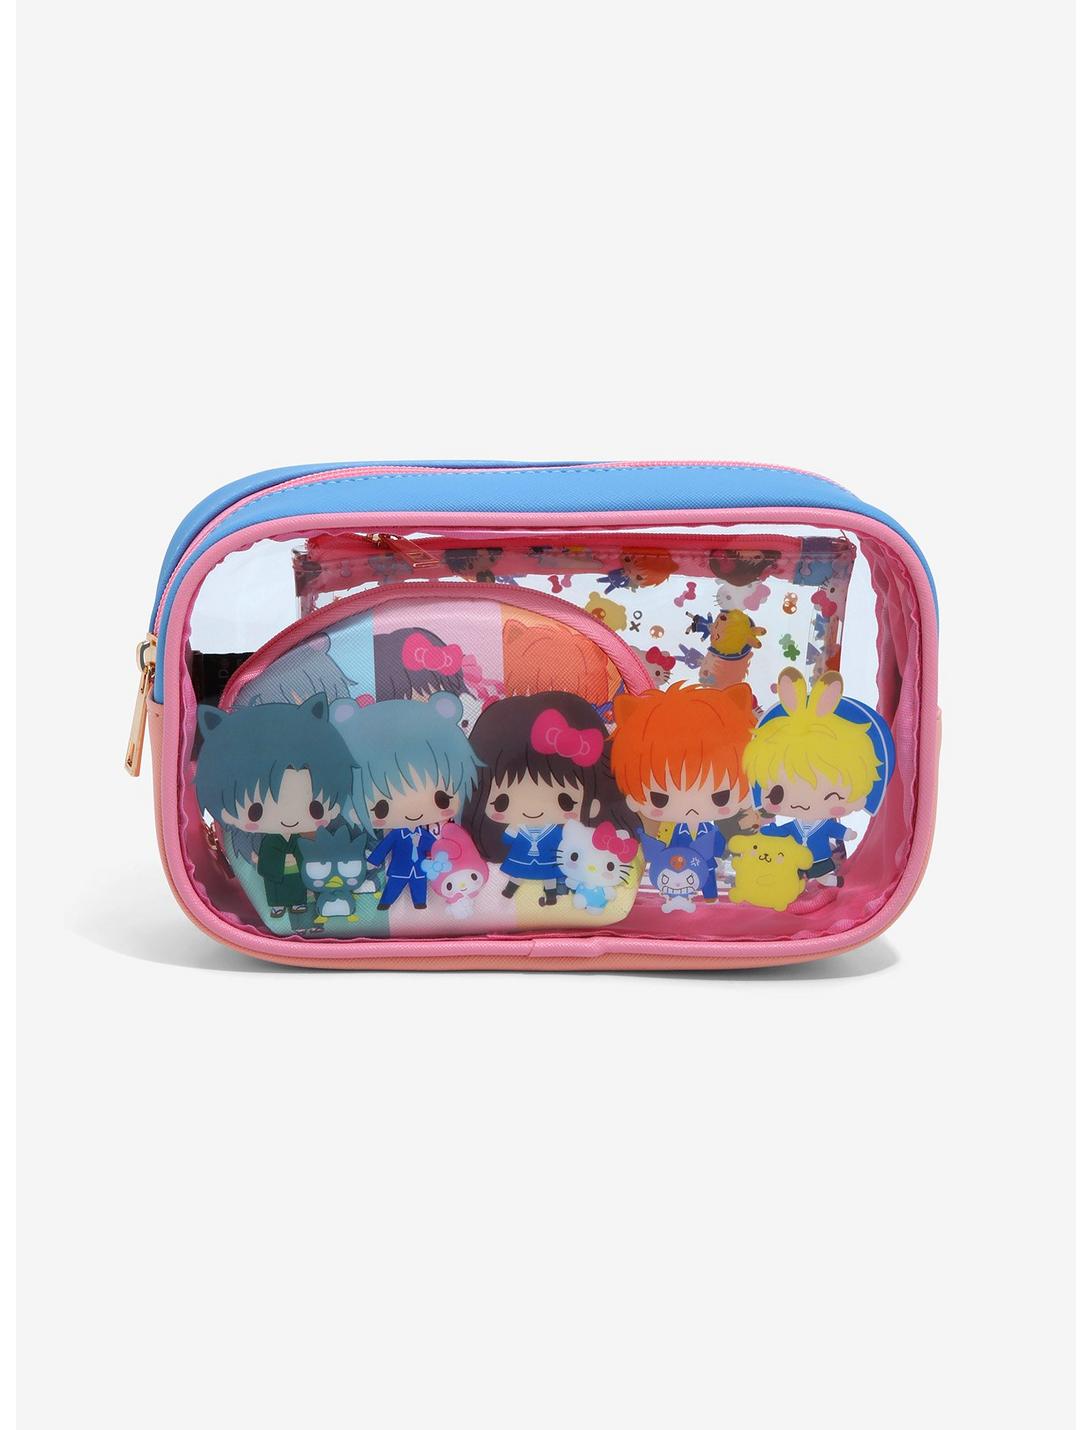 Fruits Basket x Hello Kitty and Friends Cosmetic Bag Set - A BoxLunch Exclusive, , hi-res